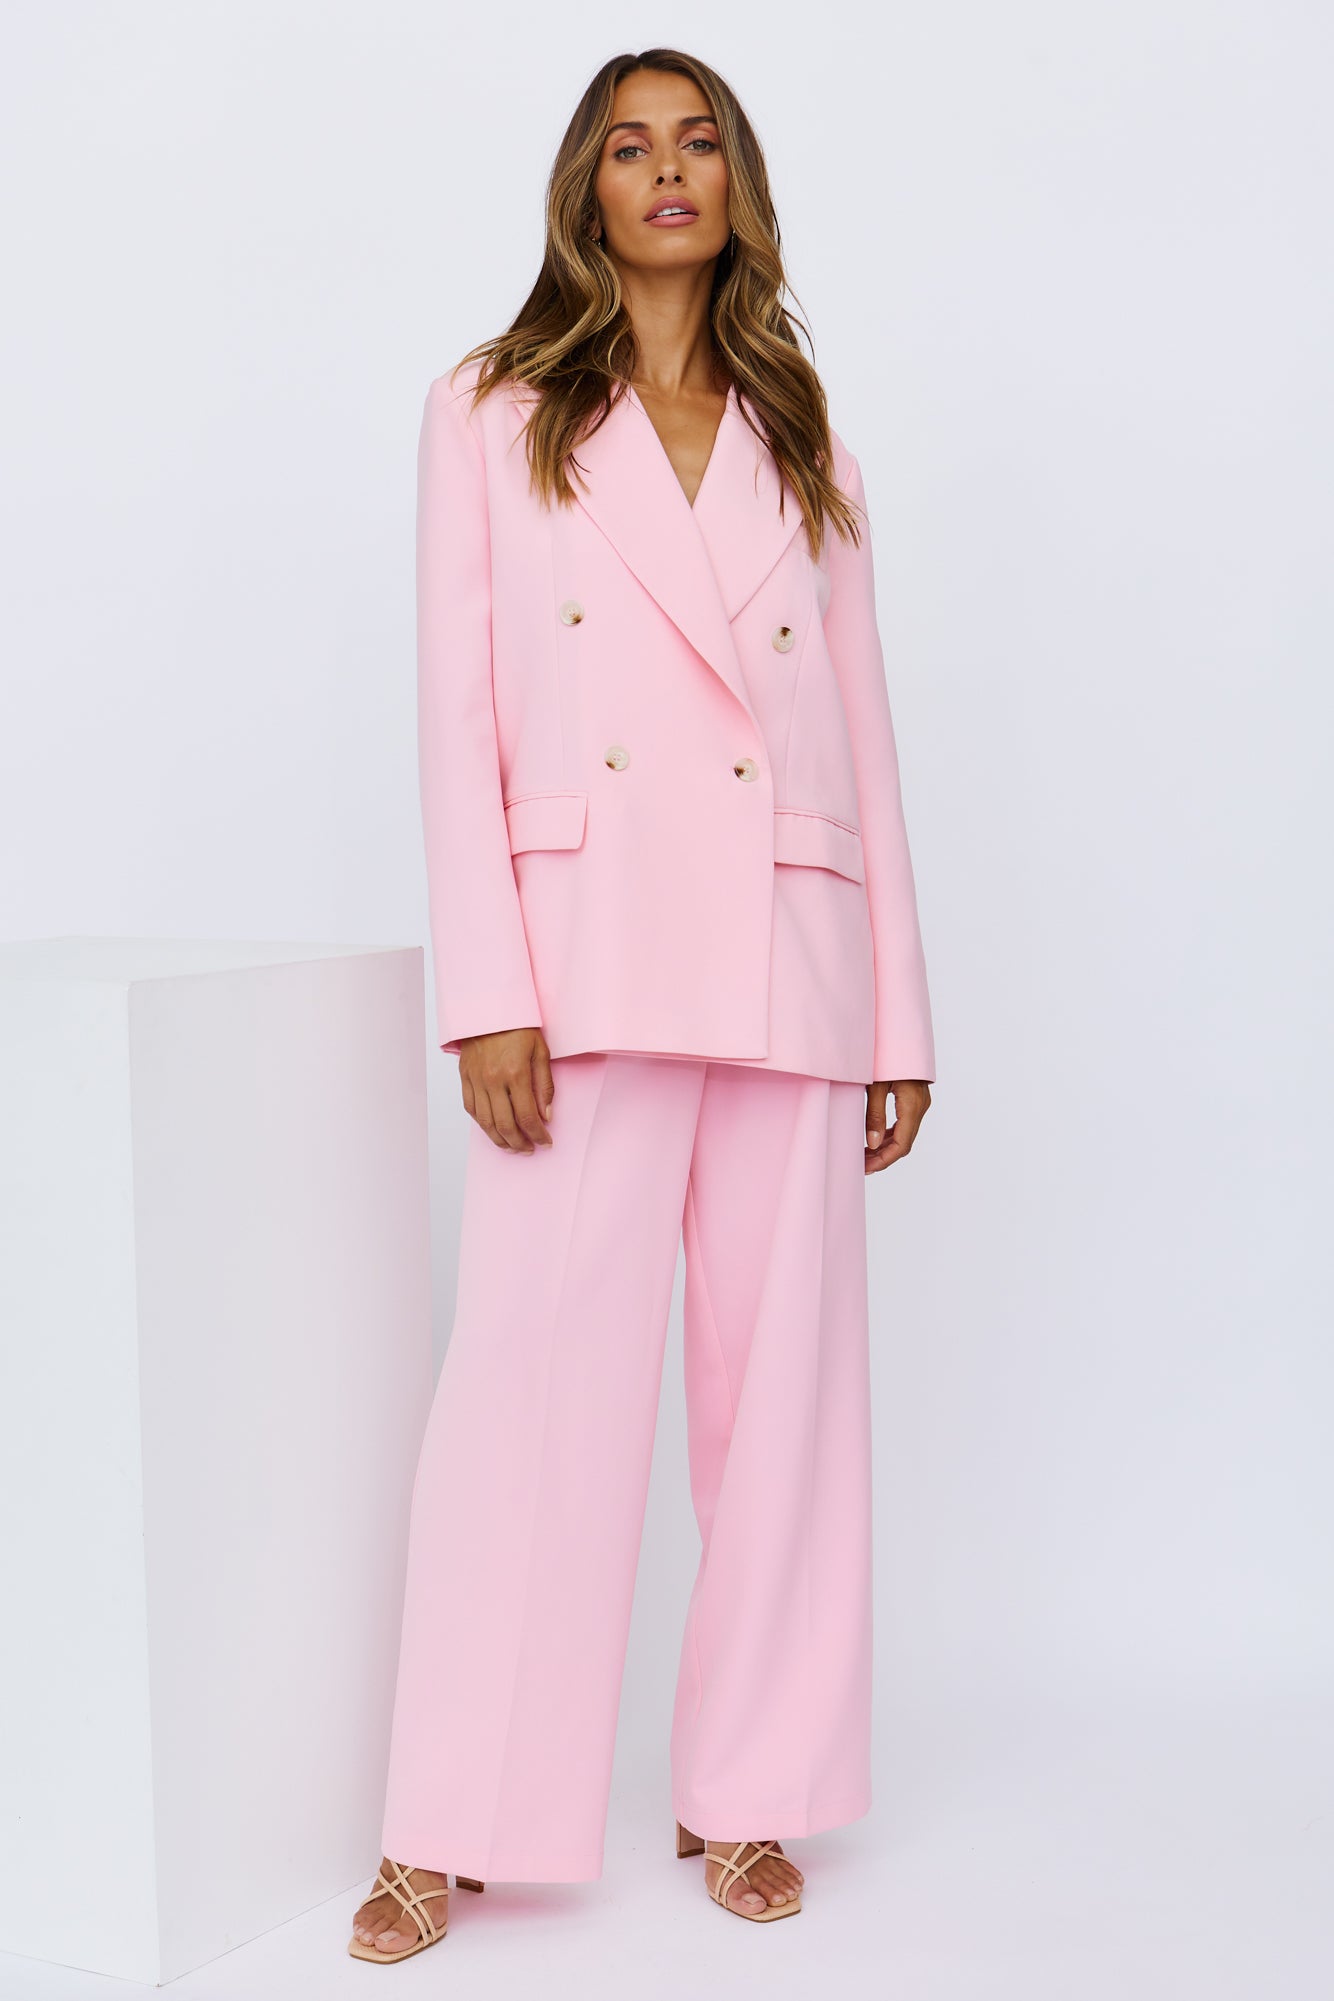 LIONESS Mulholland Drive Pant Pink